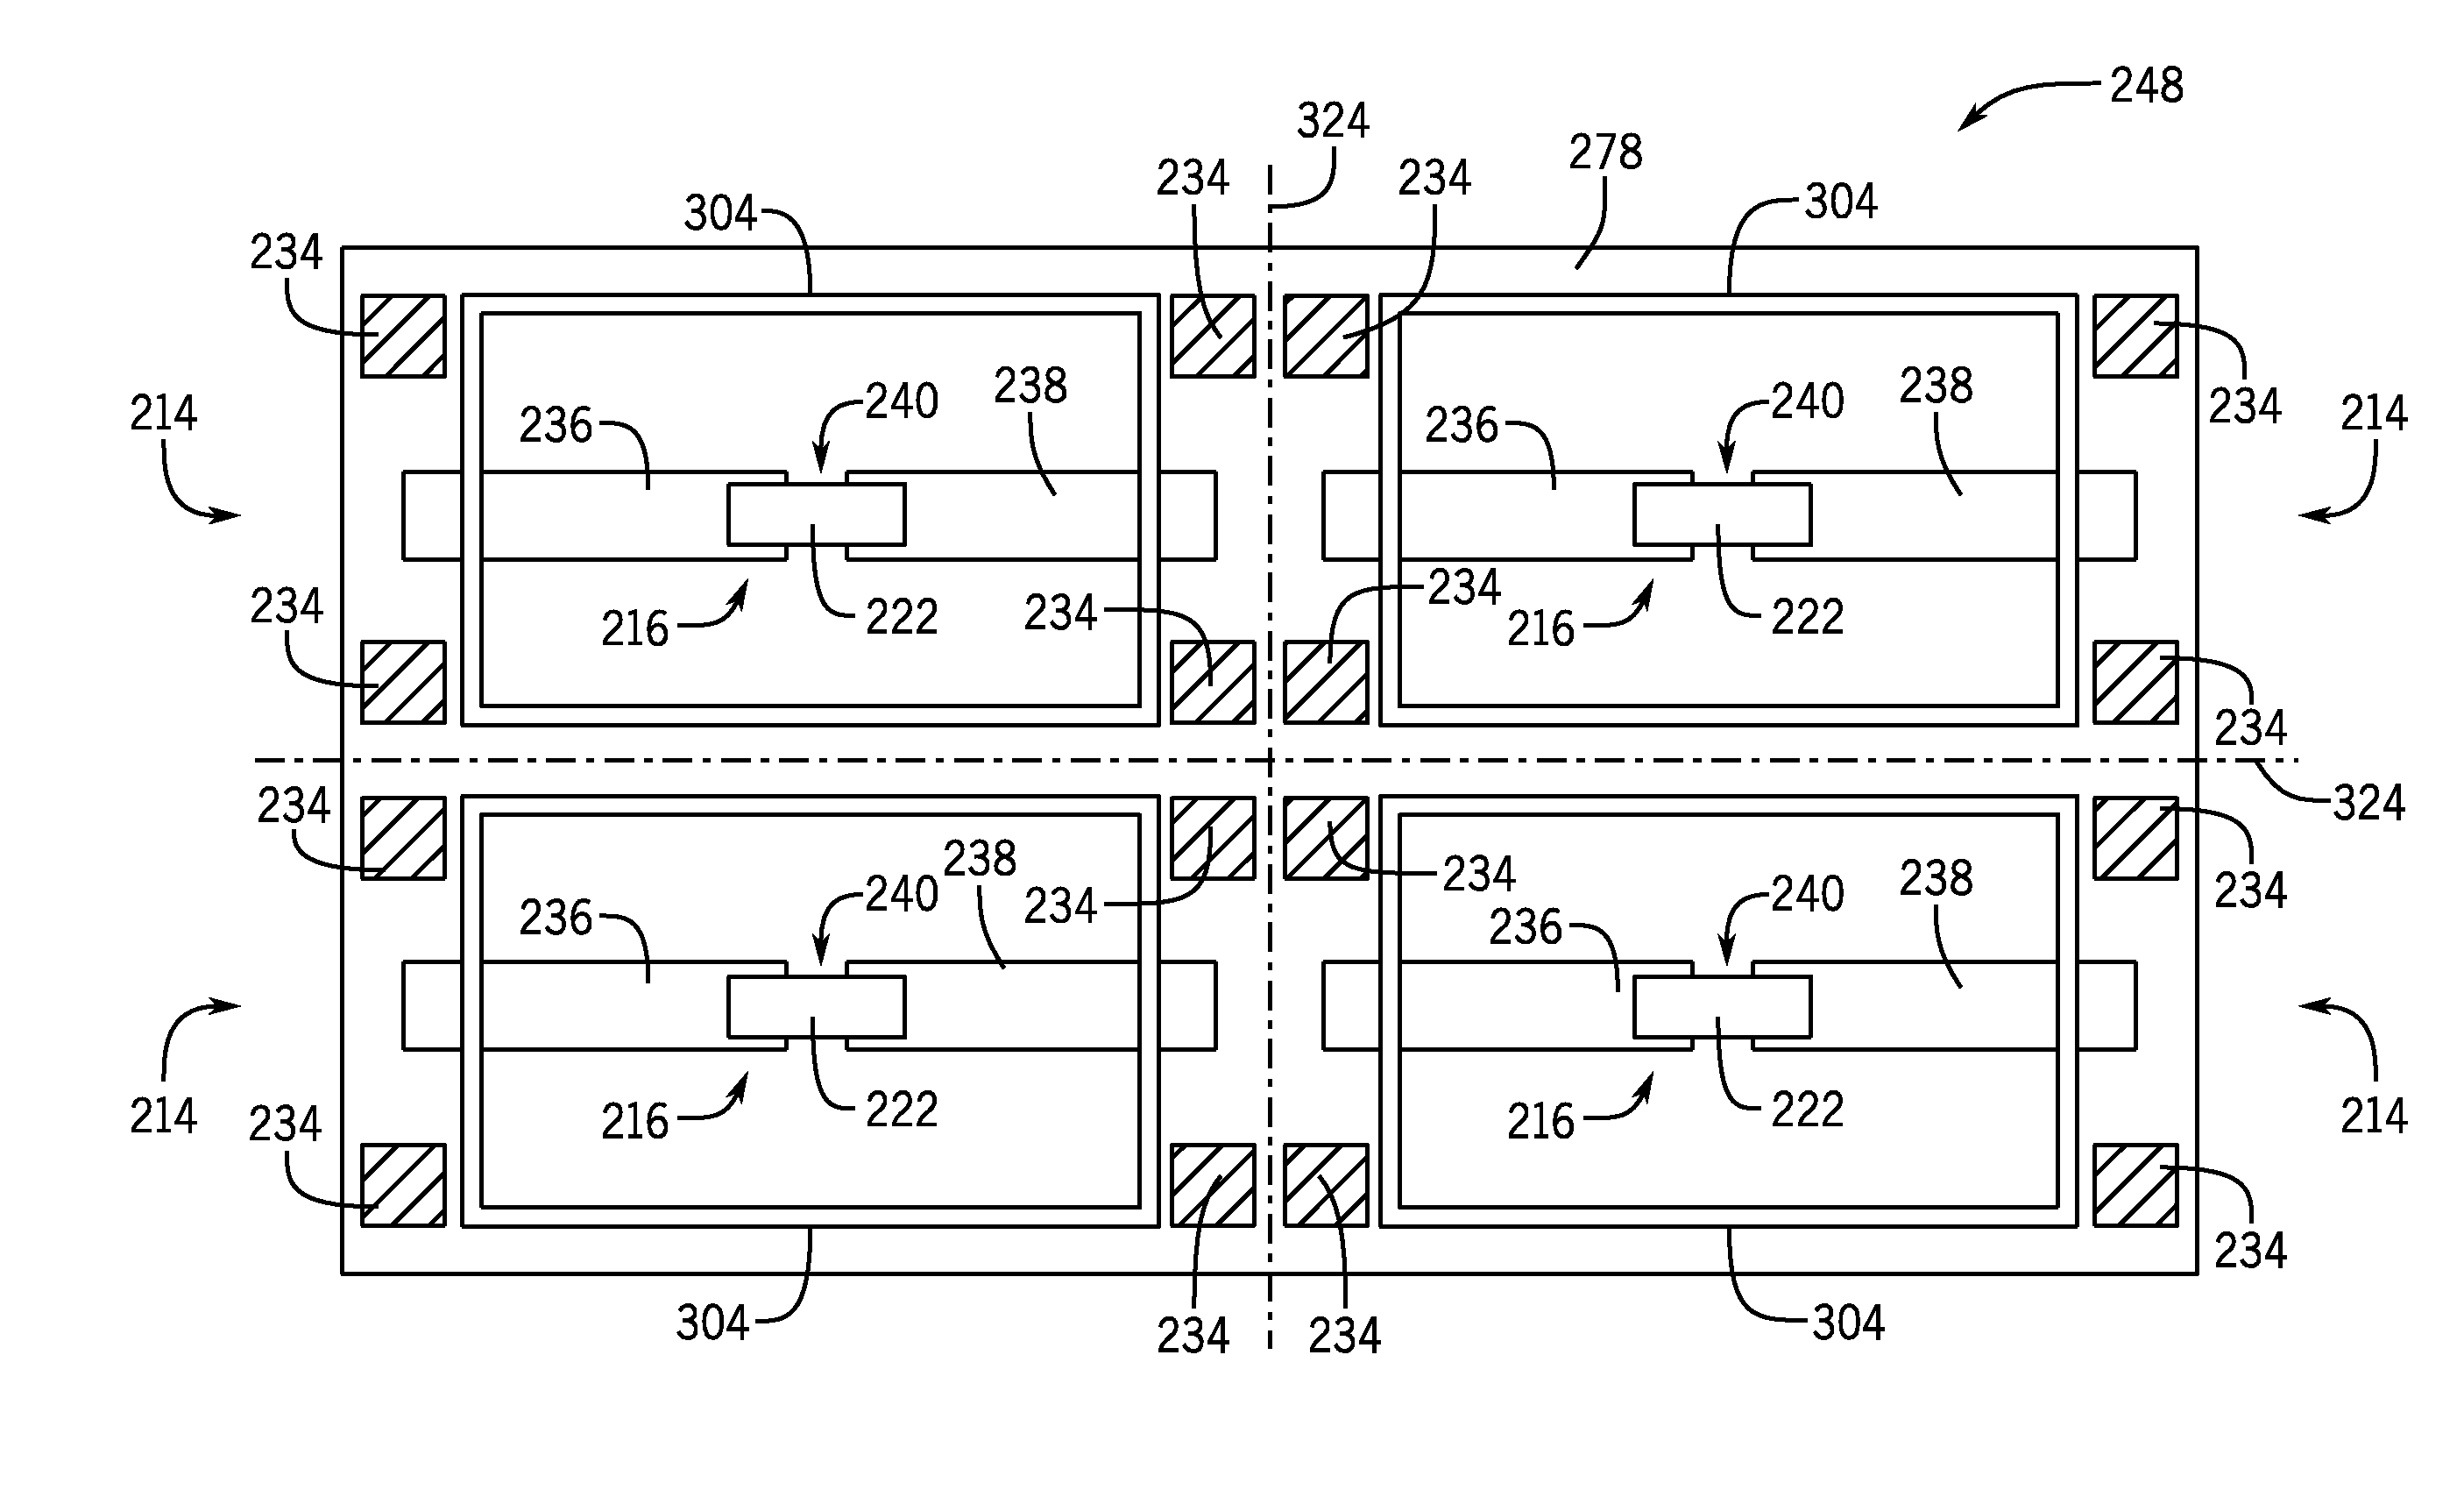 Radio frequency micro-electromechanical systems having inverted microstrip transmission lines and method of making the same